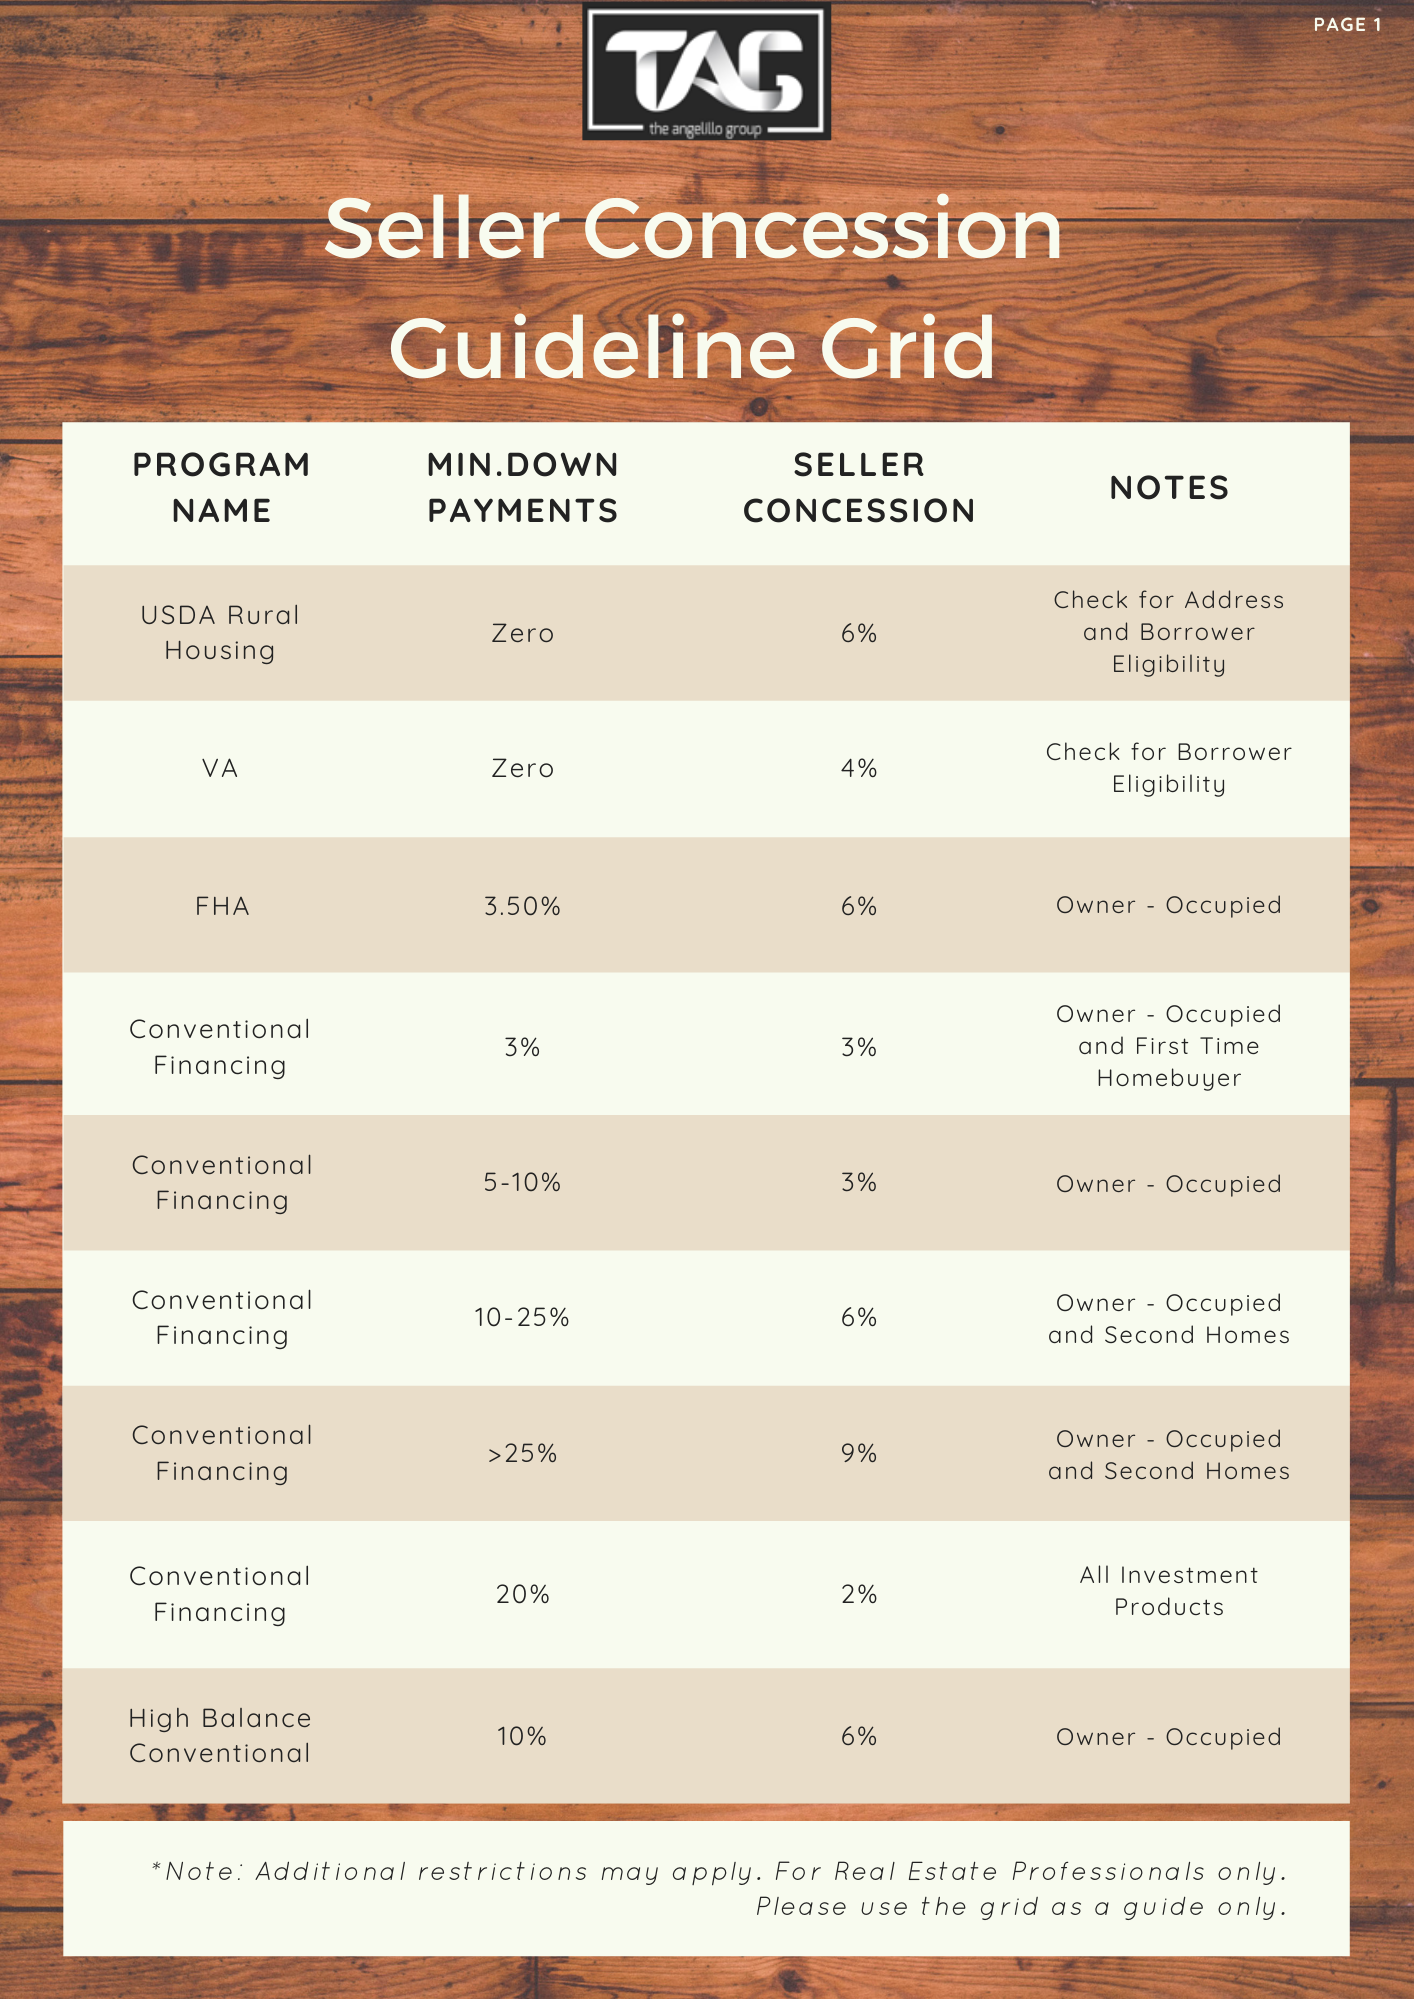 Seller Concession Guideline Grid by The TAG TEAM